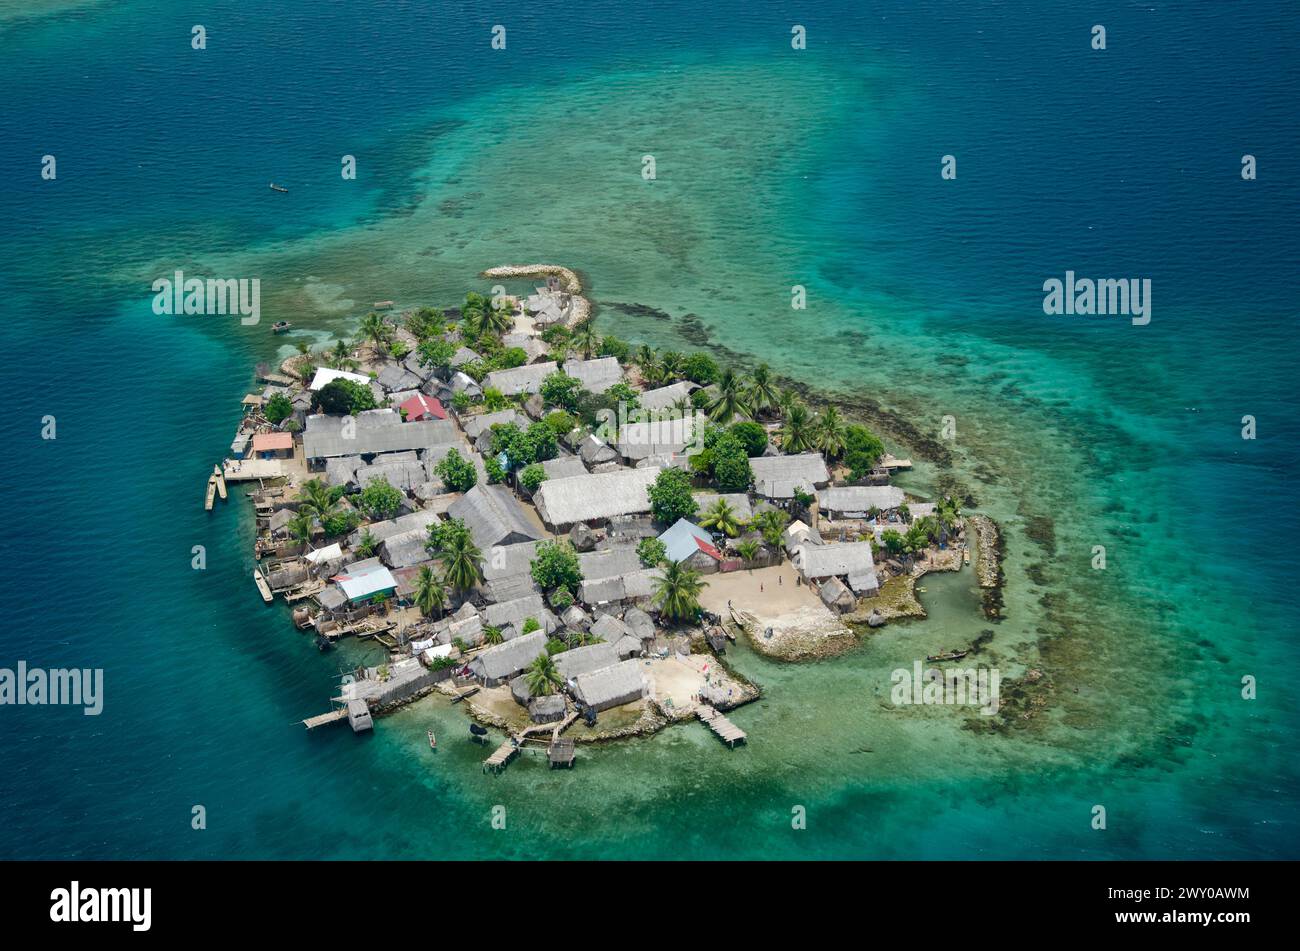 Aerial view of thatched houses and palm tree forest in island. San Blas archipelago, Caribbean, Panama, Central America - stock photo Stock Photo